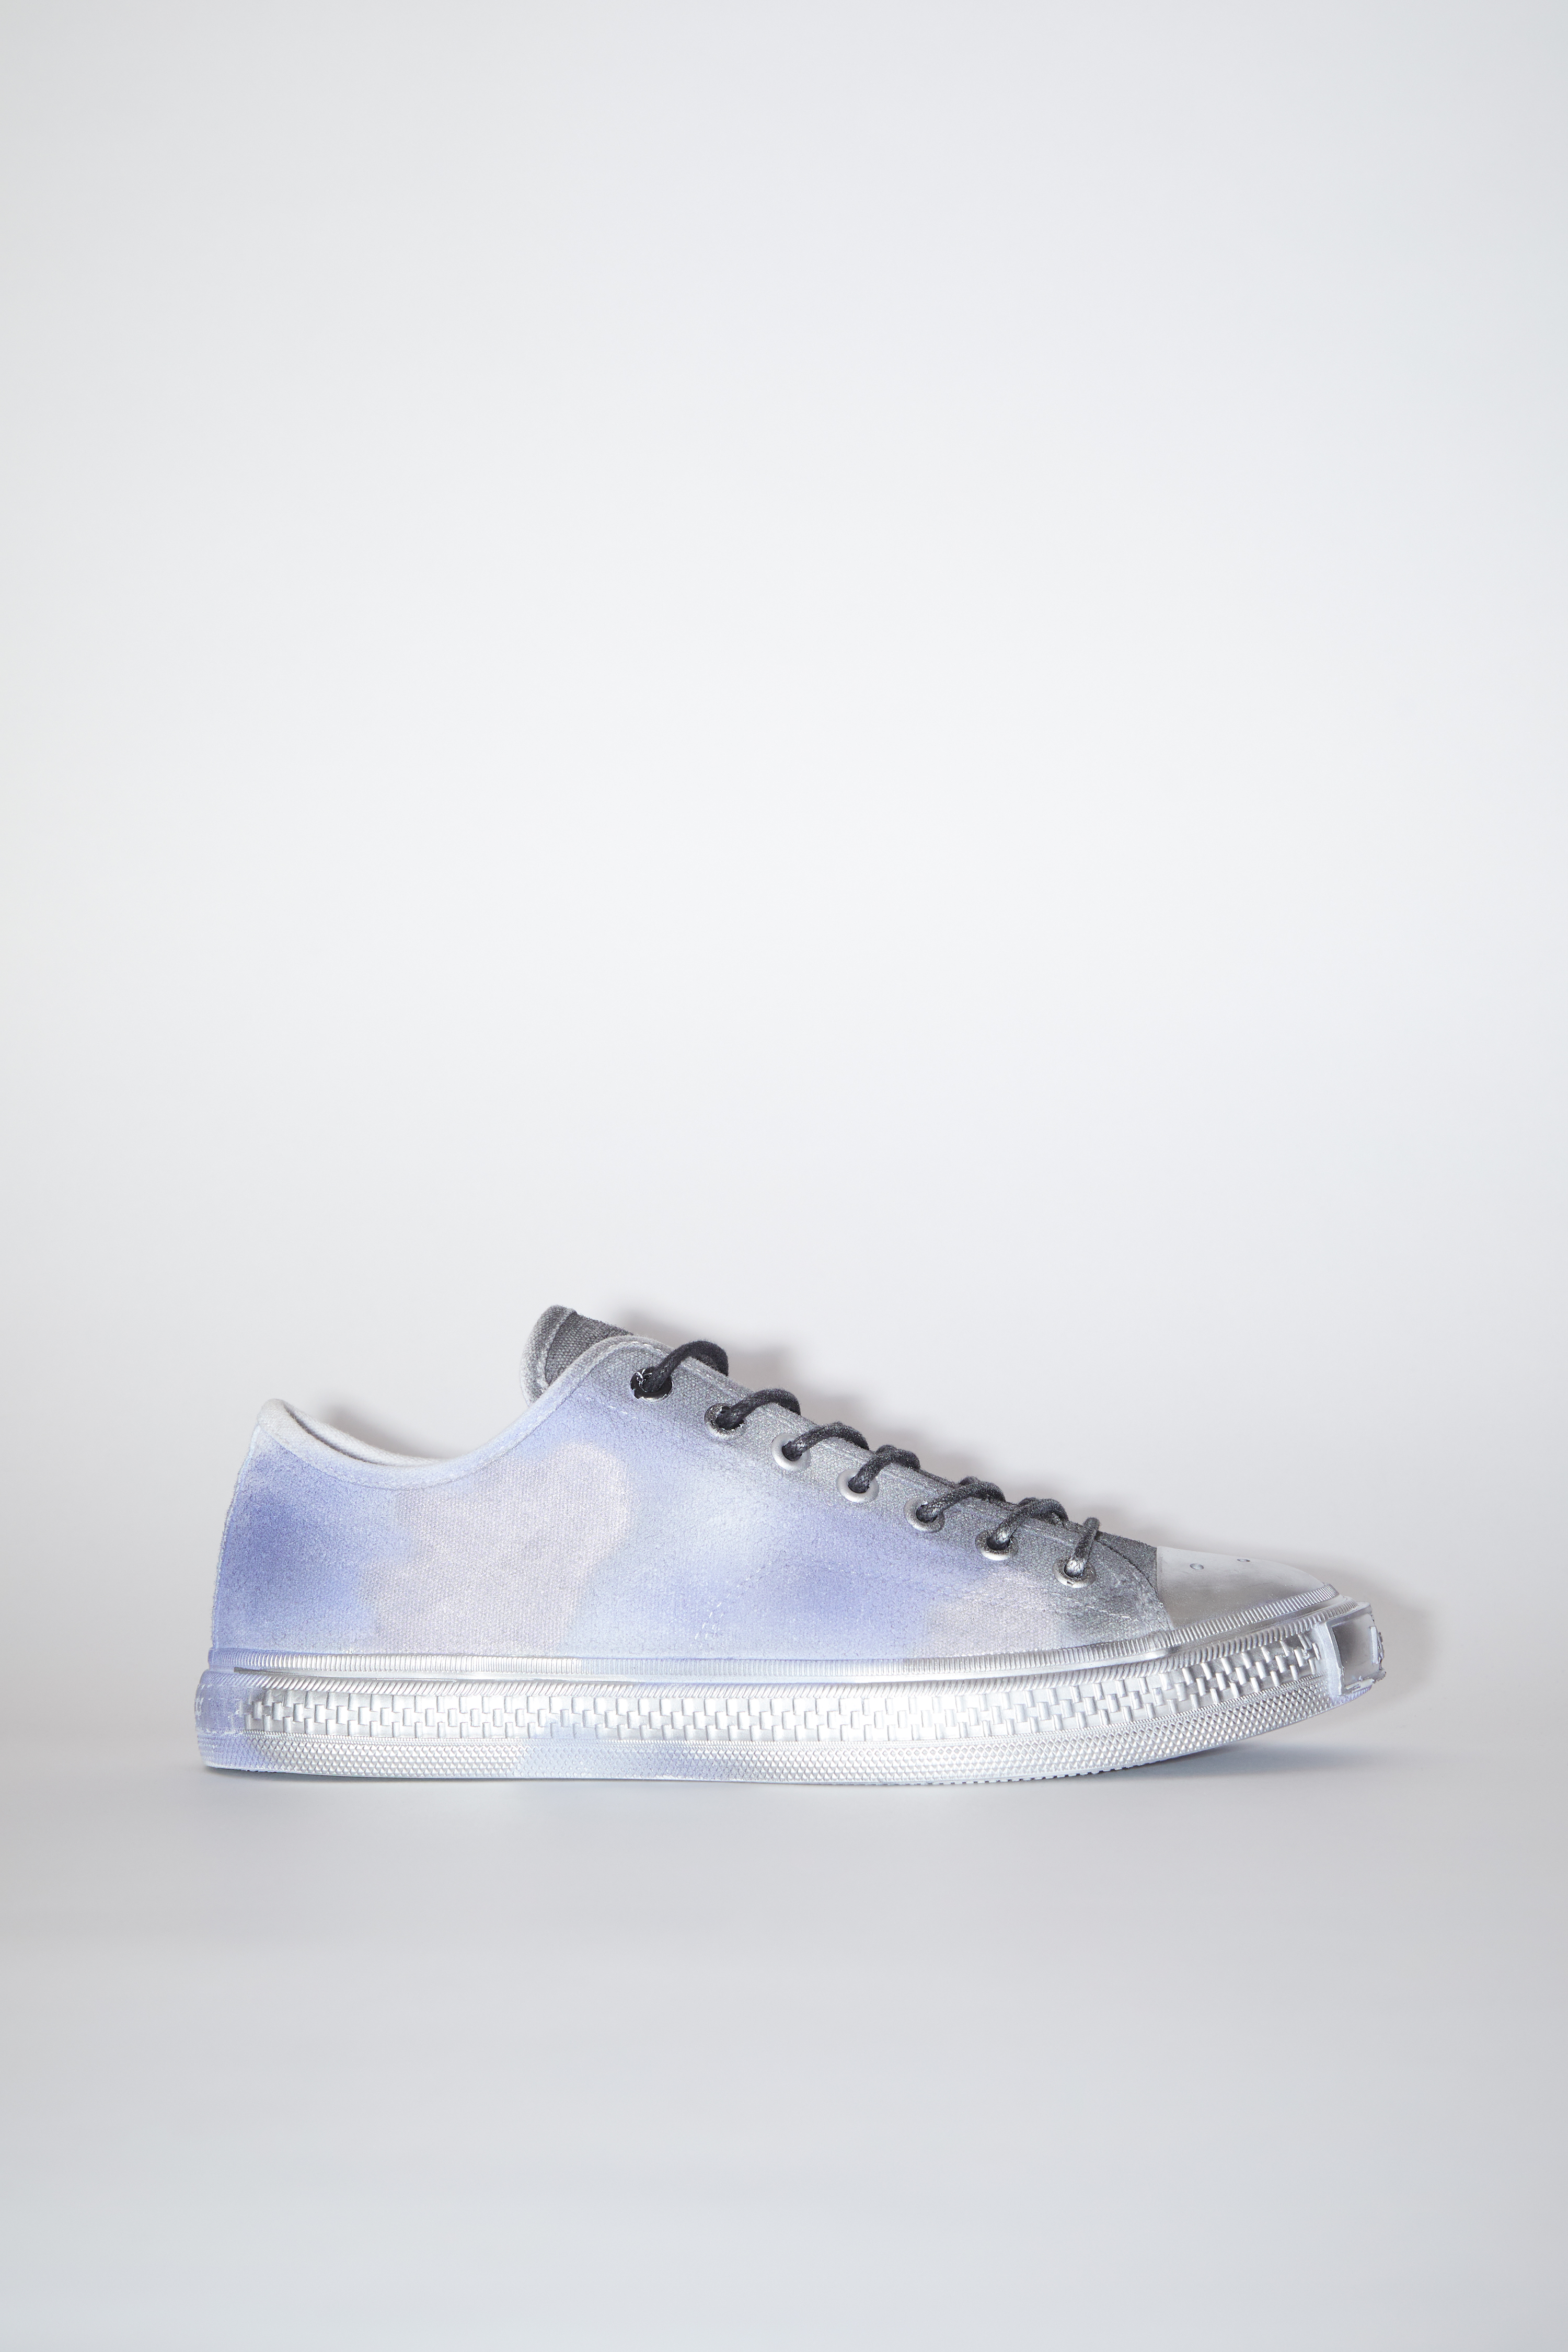 ACNE STUDIOS ACNE STUDIOS BALLOW TAG STAINED M BLUE/BLACK SPRAYED LOW TOP SNEAKERS